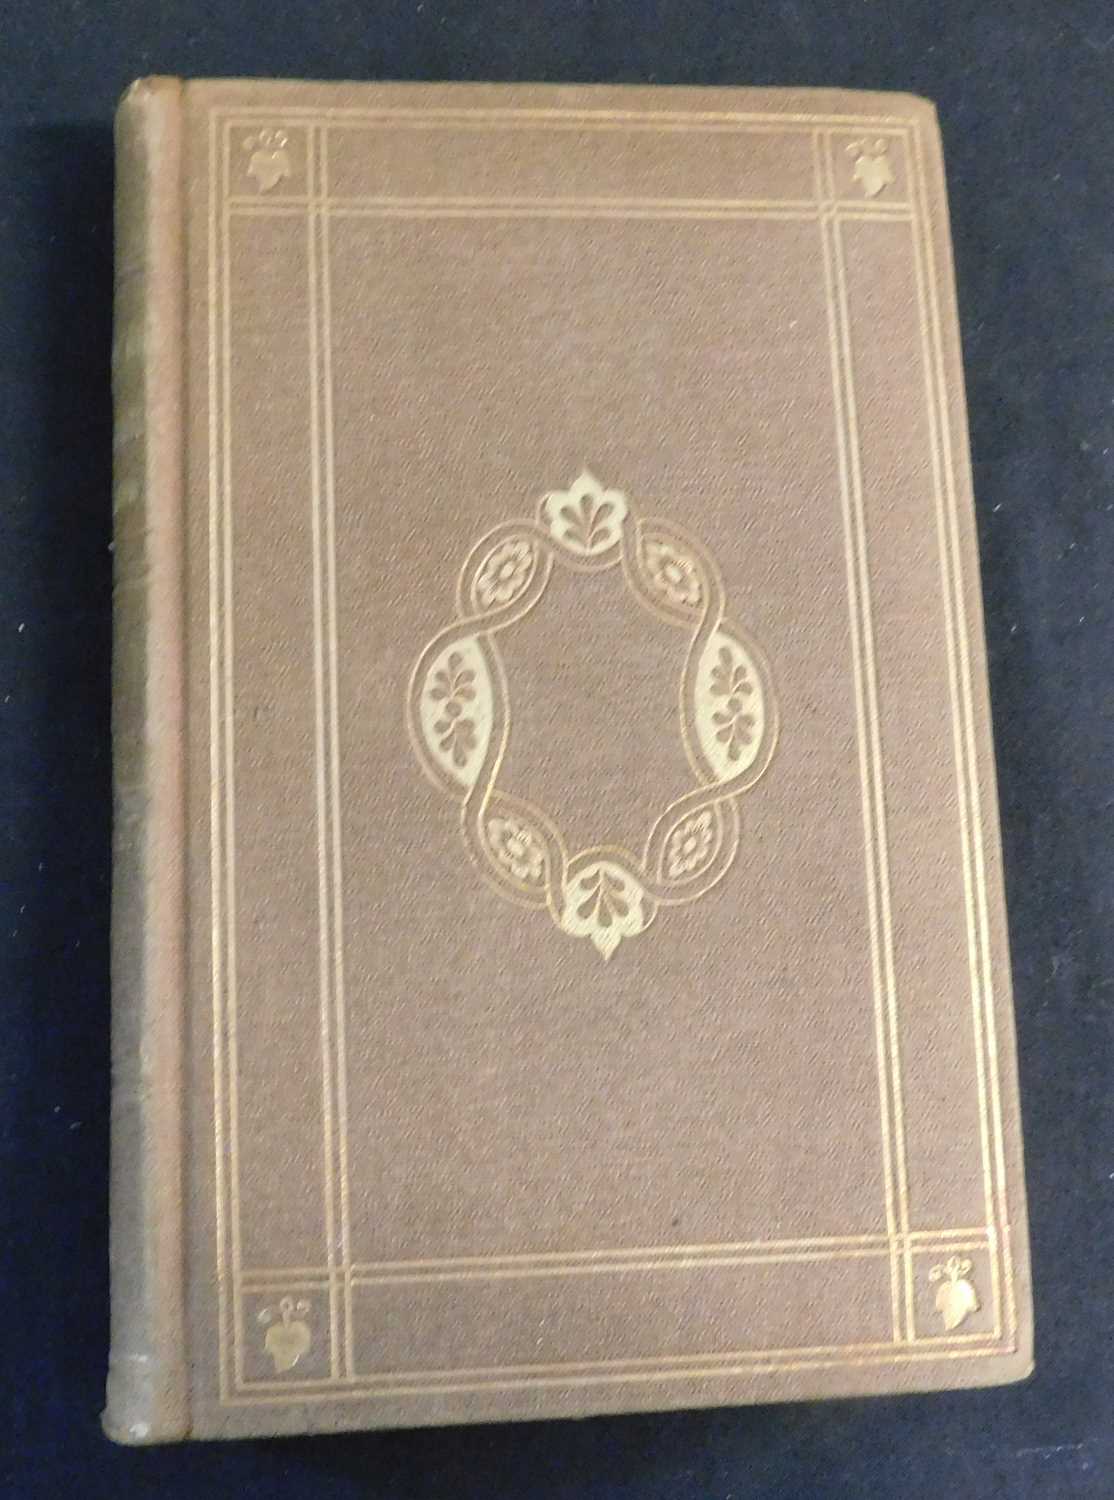 HENRY WADSWORTH LONGFELLOW: THE COURTSHIP OF MILES STANDISH AND OTHER POEMS, Boston, Ticknor & - Image 2 of 2